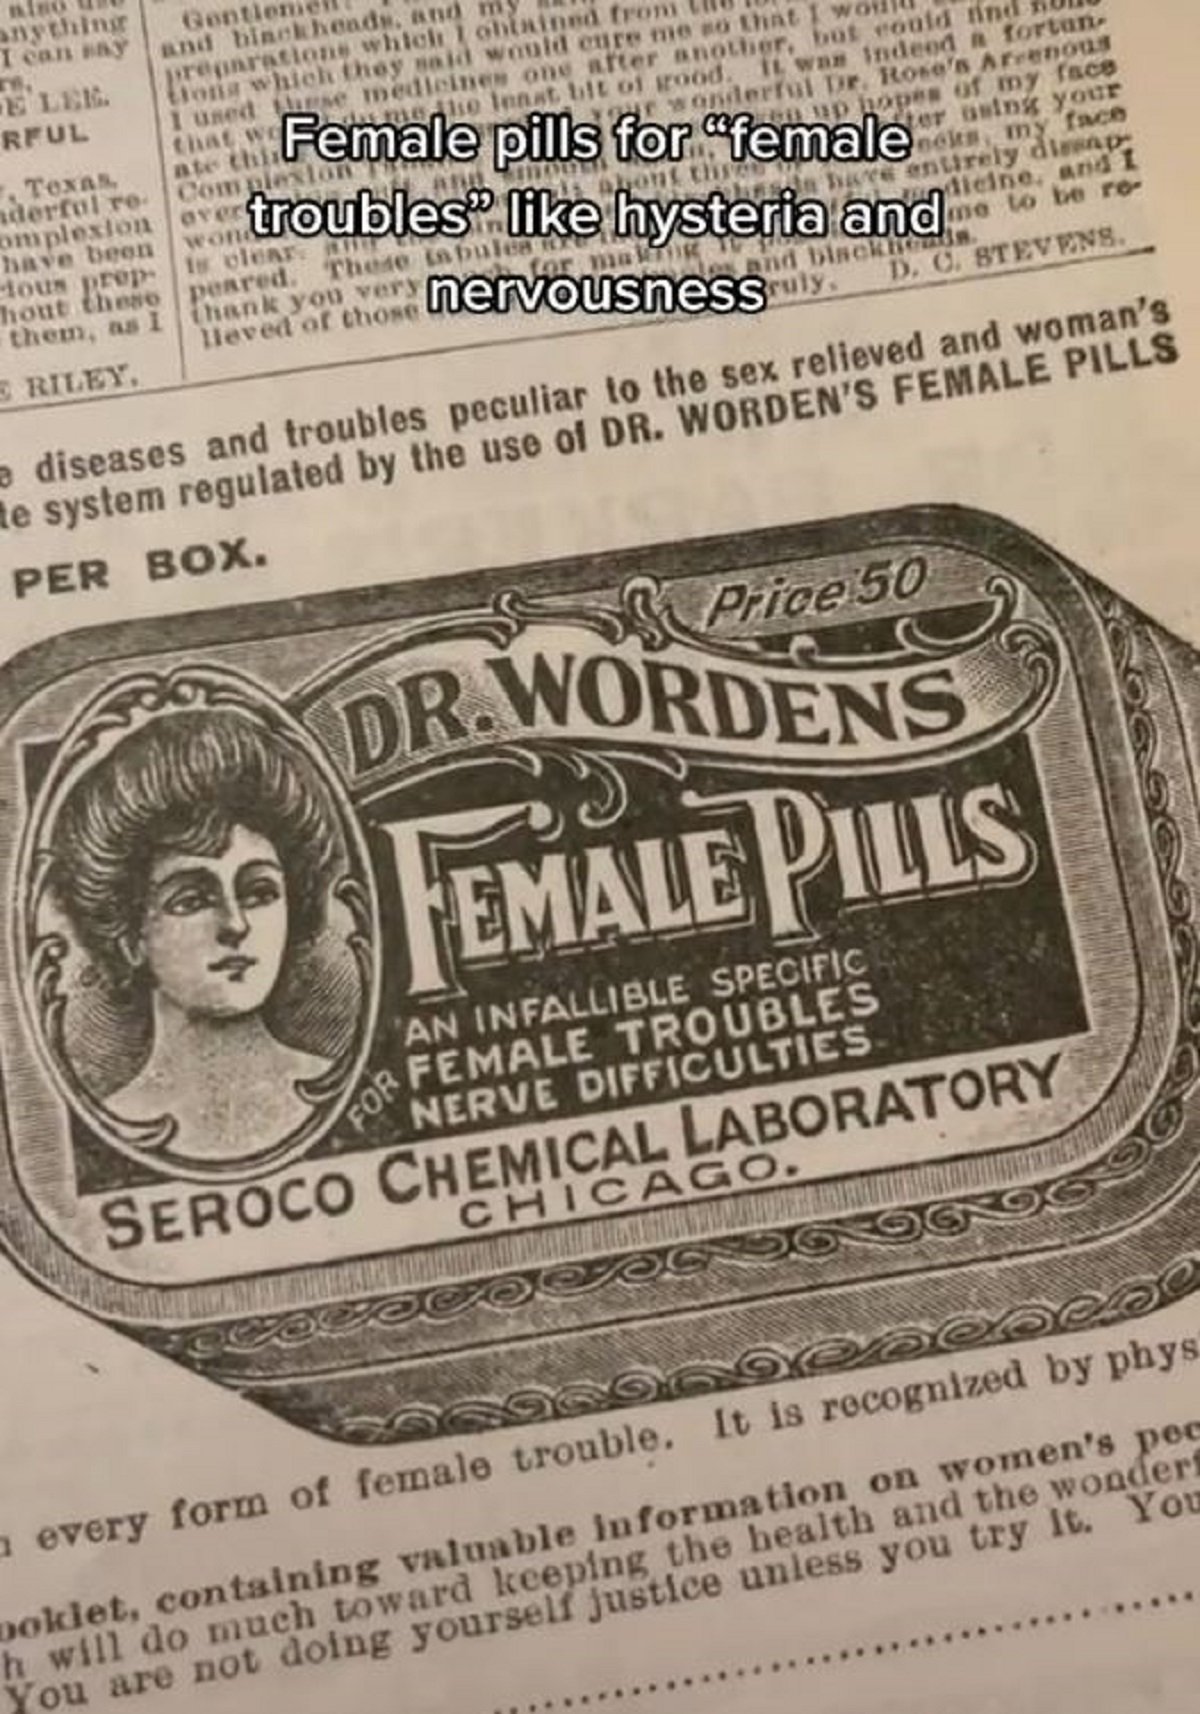 Unearthed Sears Catalog From 1905 Reveals Arsenous Tablets and Bust Cream